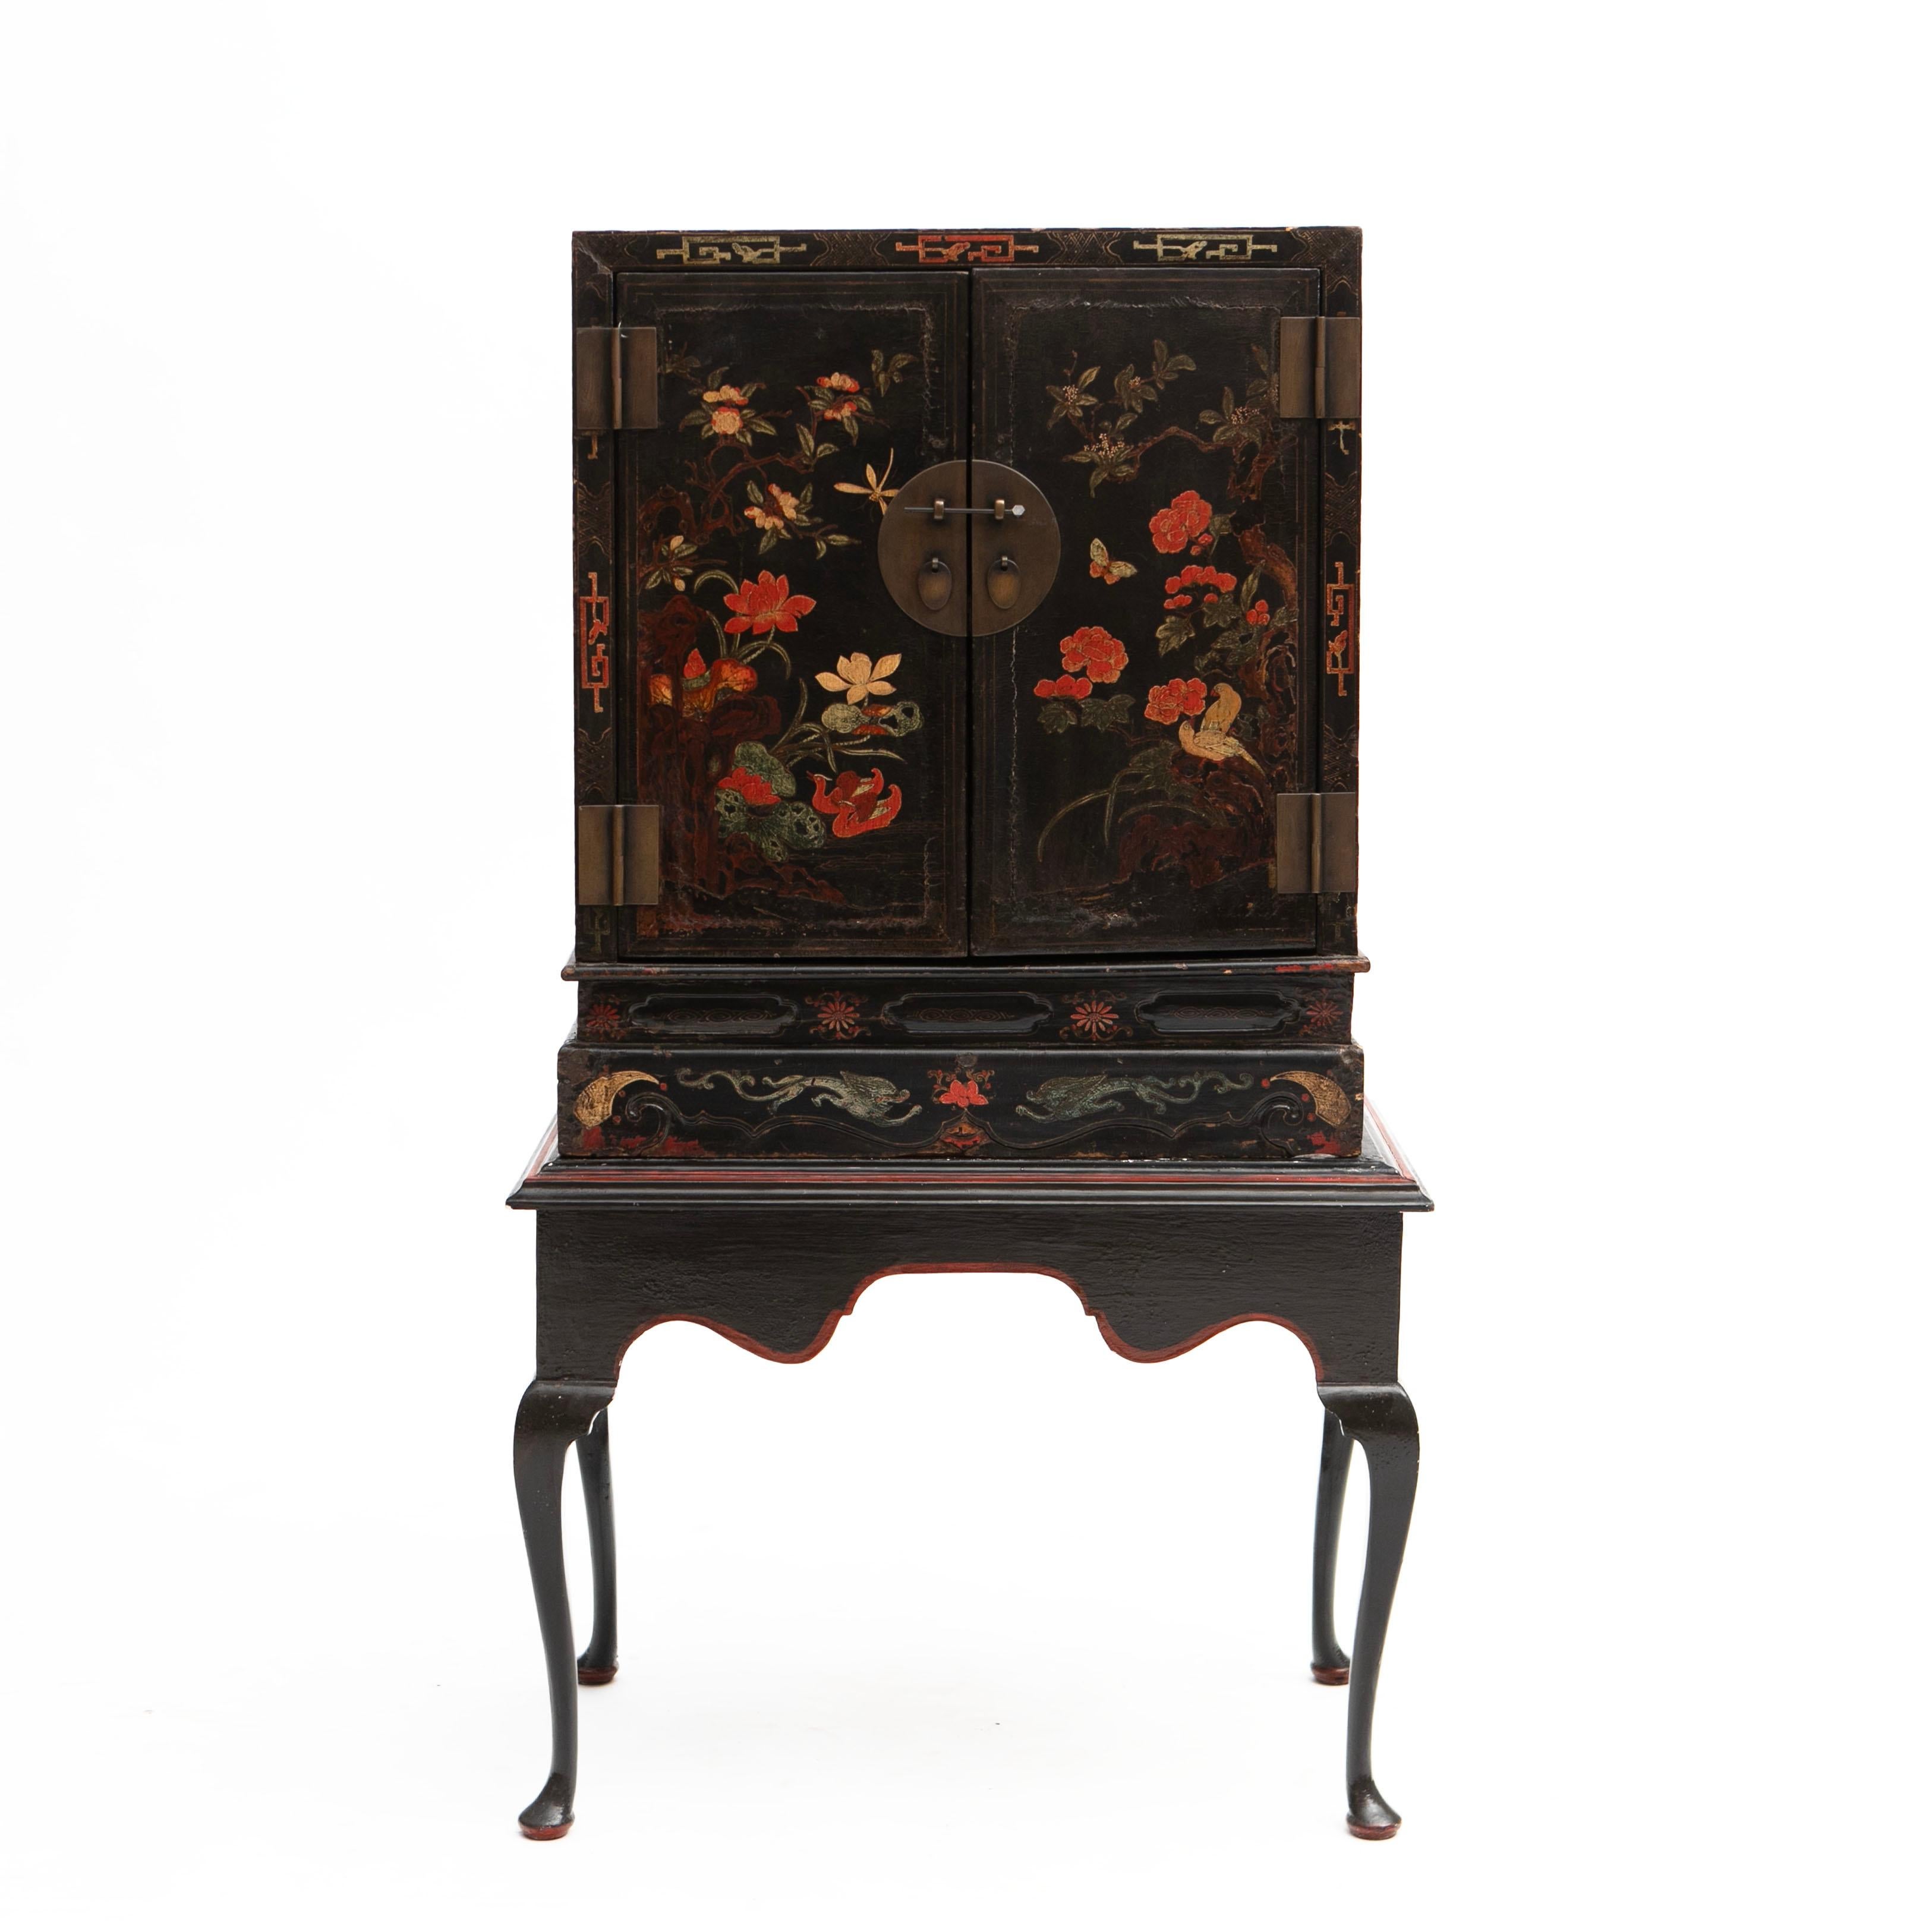 Chinese Qing dynasty cabinet with original chinoiserie decorations rasied on later stand.
Cabinet elaborately decorated with flowers painted with polychrome lacquer on a thick black lacquer base. Later red and black stand.

A beautiful and